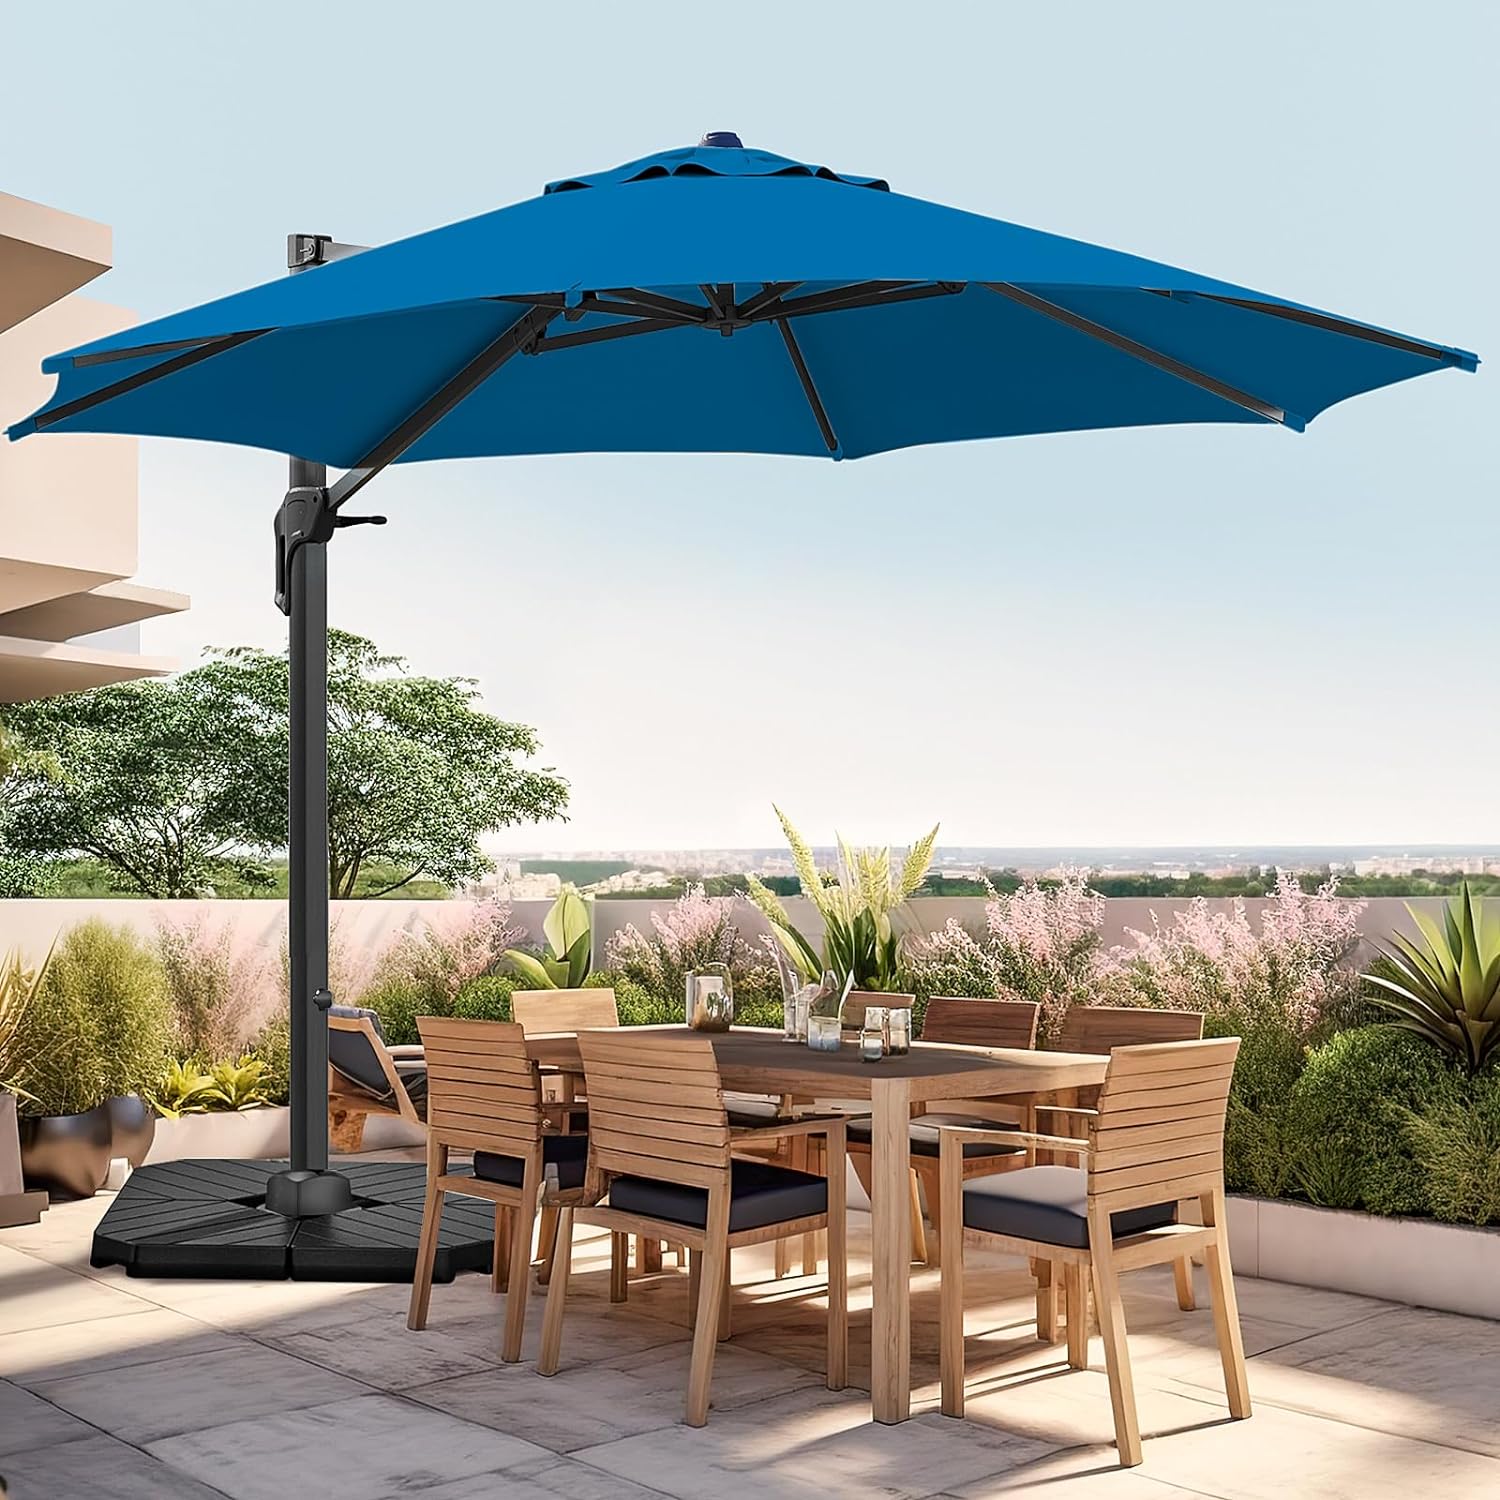 wikiwiki 11 FT Cantilever Patio Umbrellas Outdoor Large Offset Umbrella w/ 36 Month Fade Resistance Recycled Fabric, 6-Level 360Rotation Aluminum Pole for Deck Pool Garden, Royal Blue